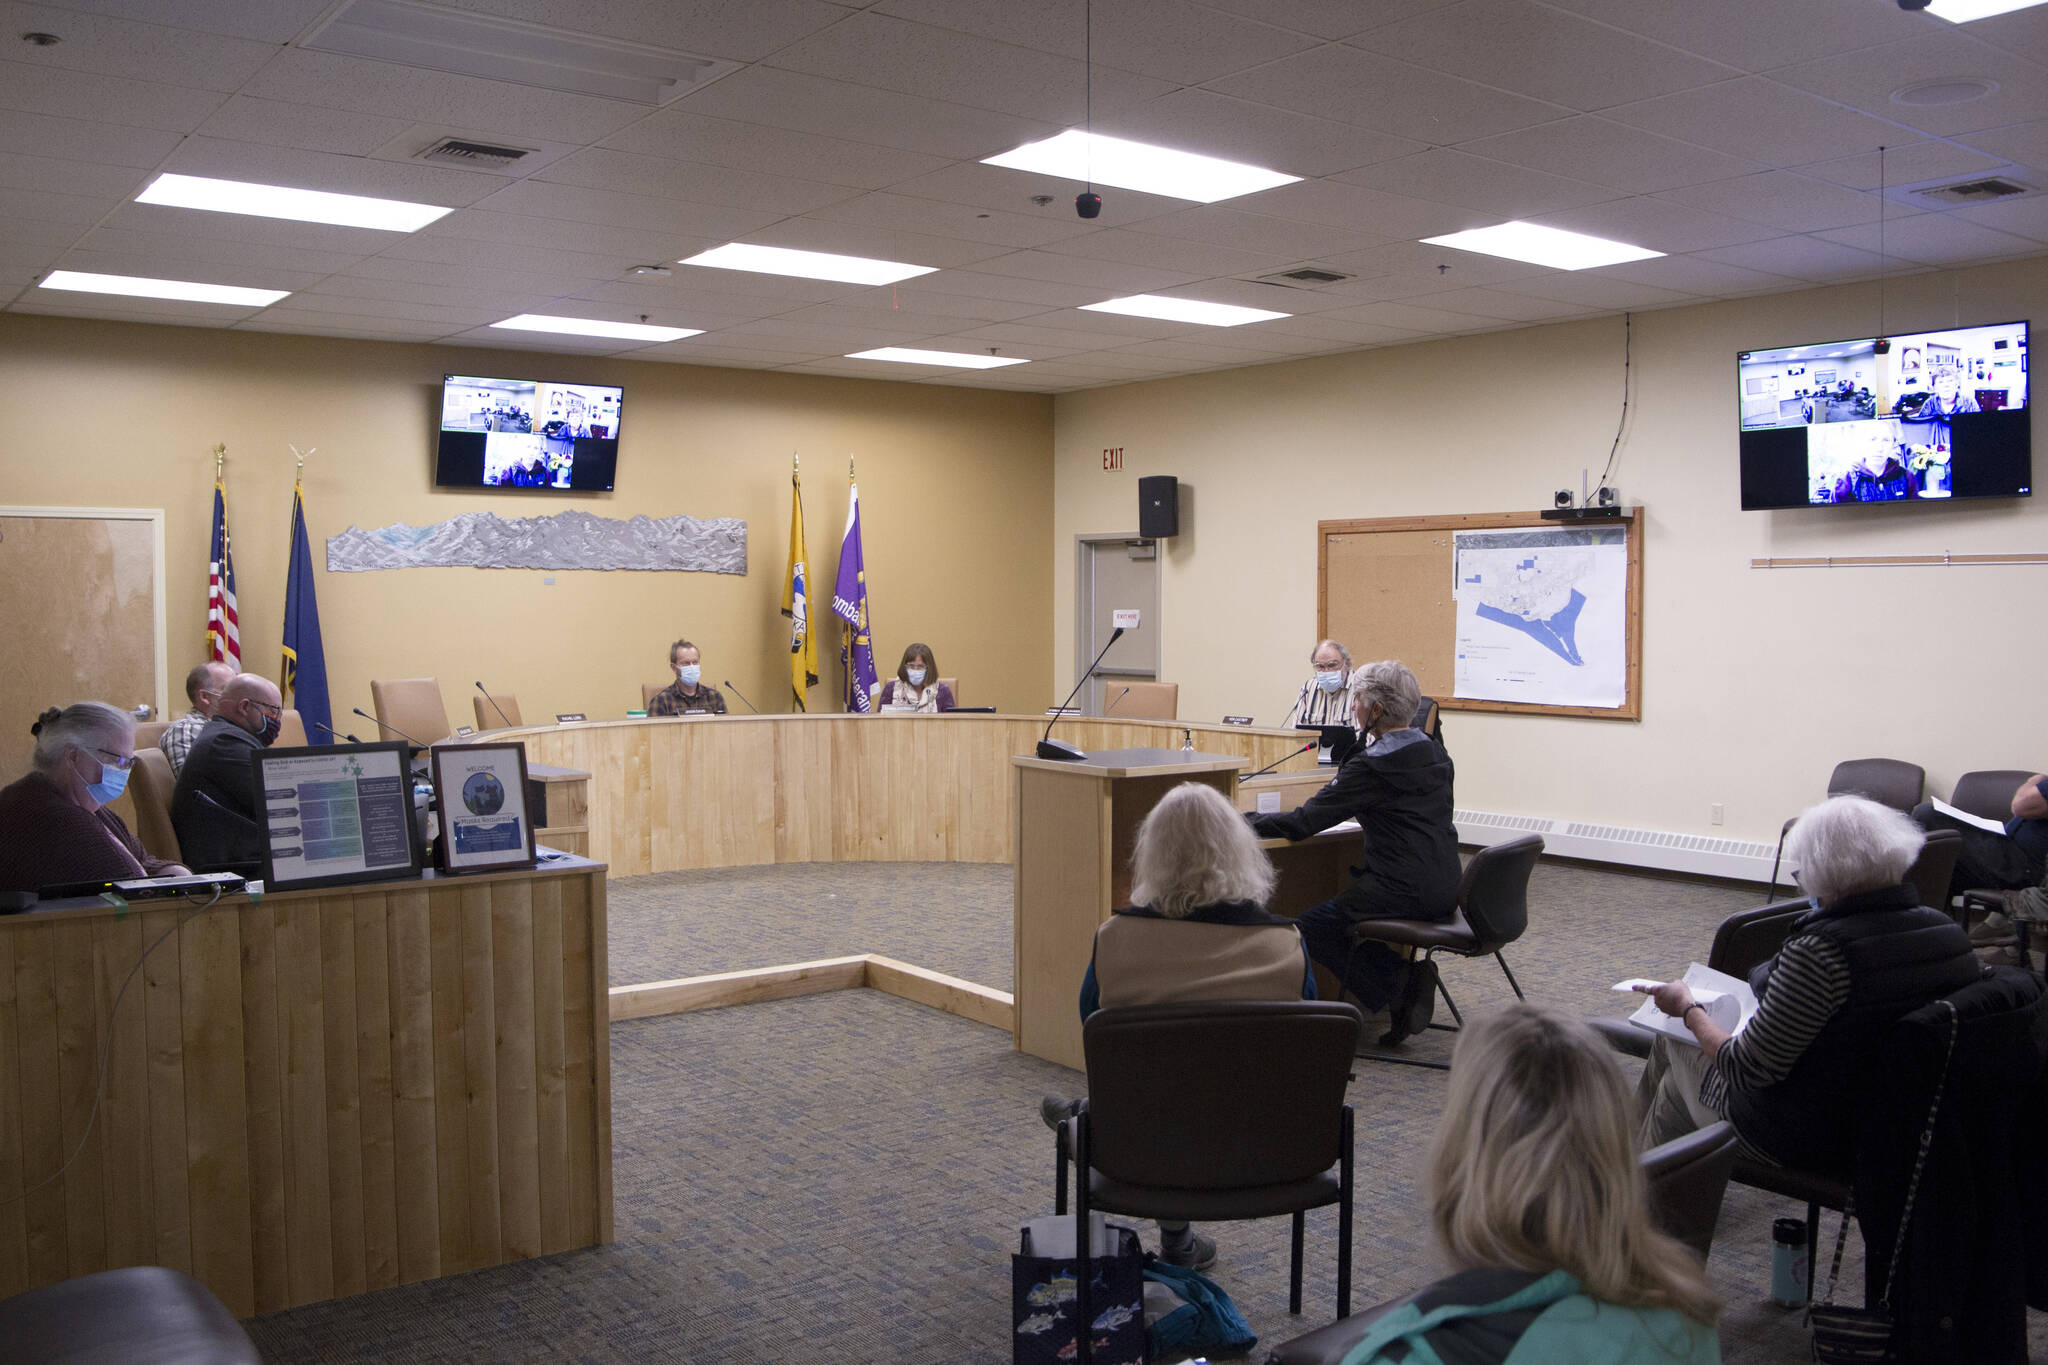 Janie Leask, a Homer resident, spoke in support of the new multi-use community center during Monday night’s city council meeting, stating the need for community recreation is vital.